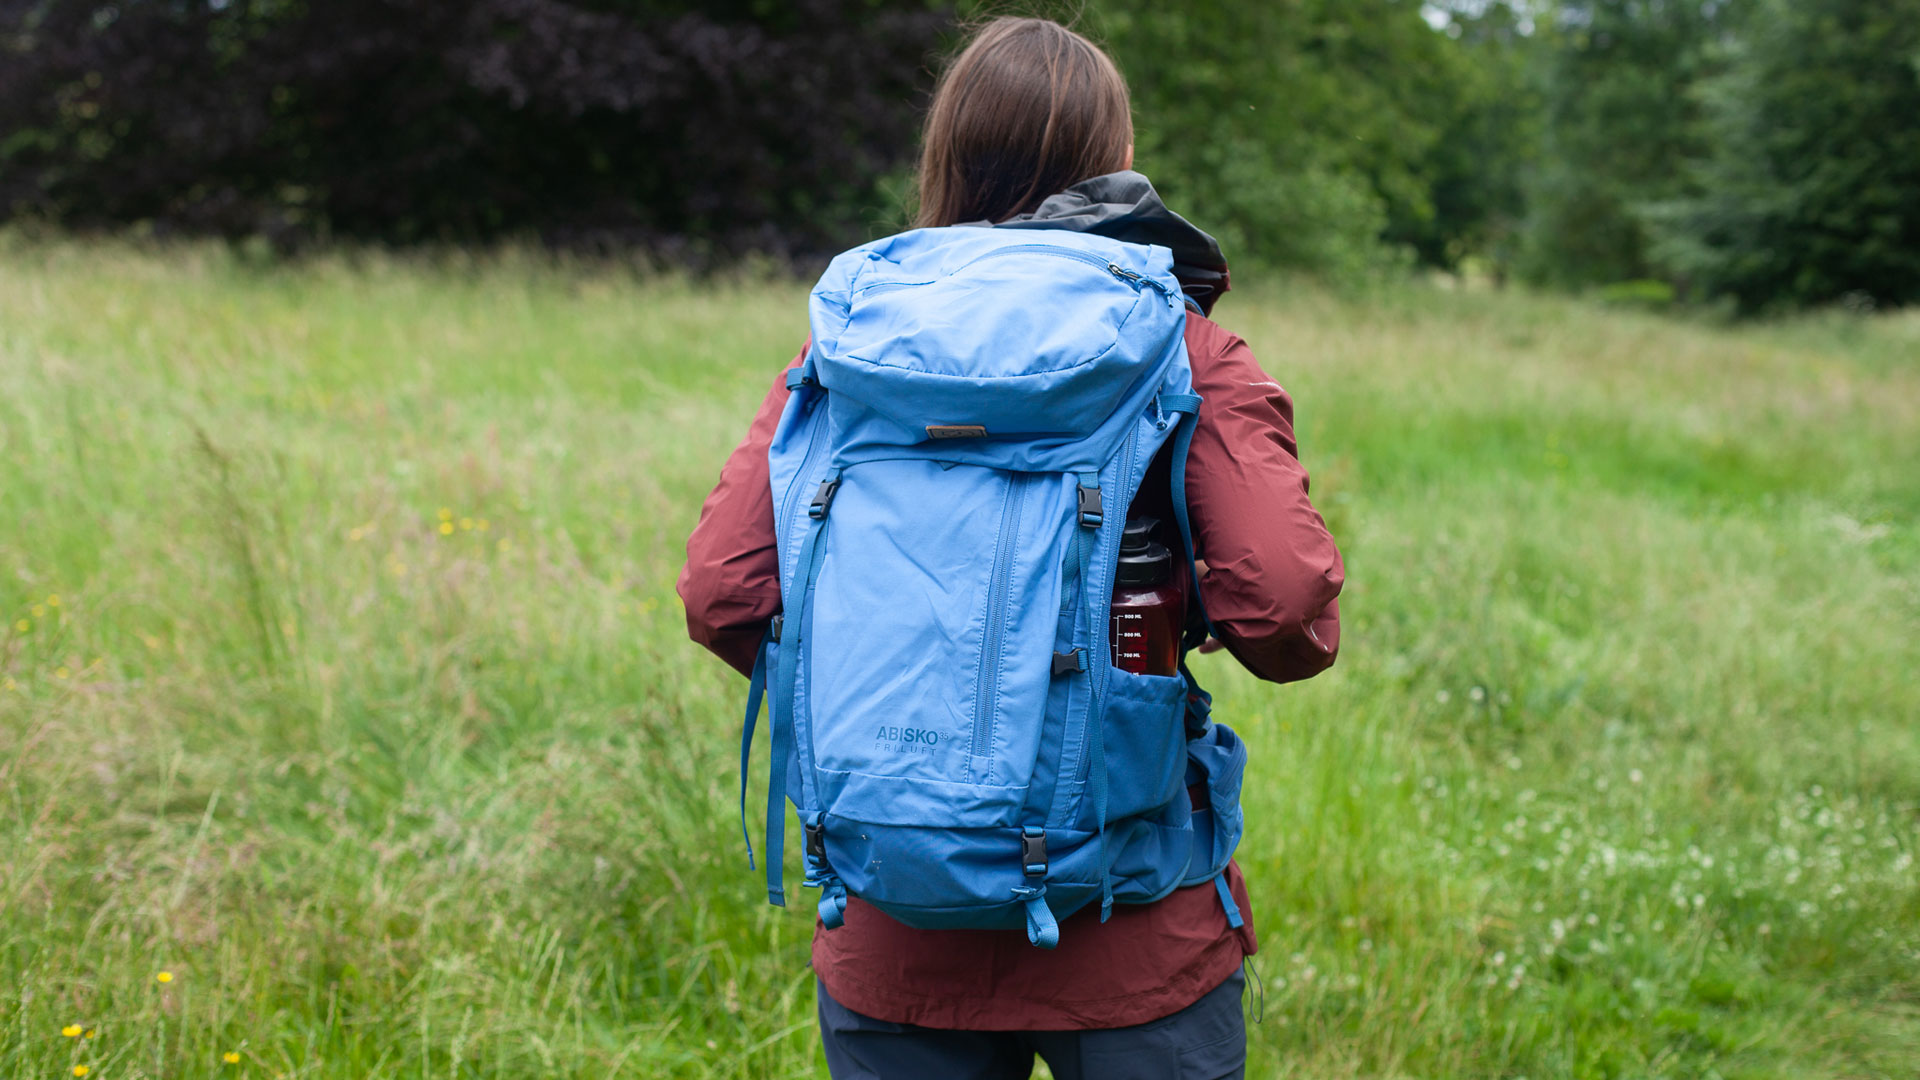 The Best Hiking Gear: 35+ Product Reviews - Green Global Travel